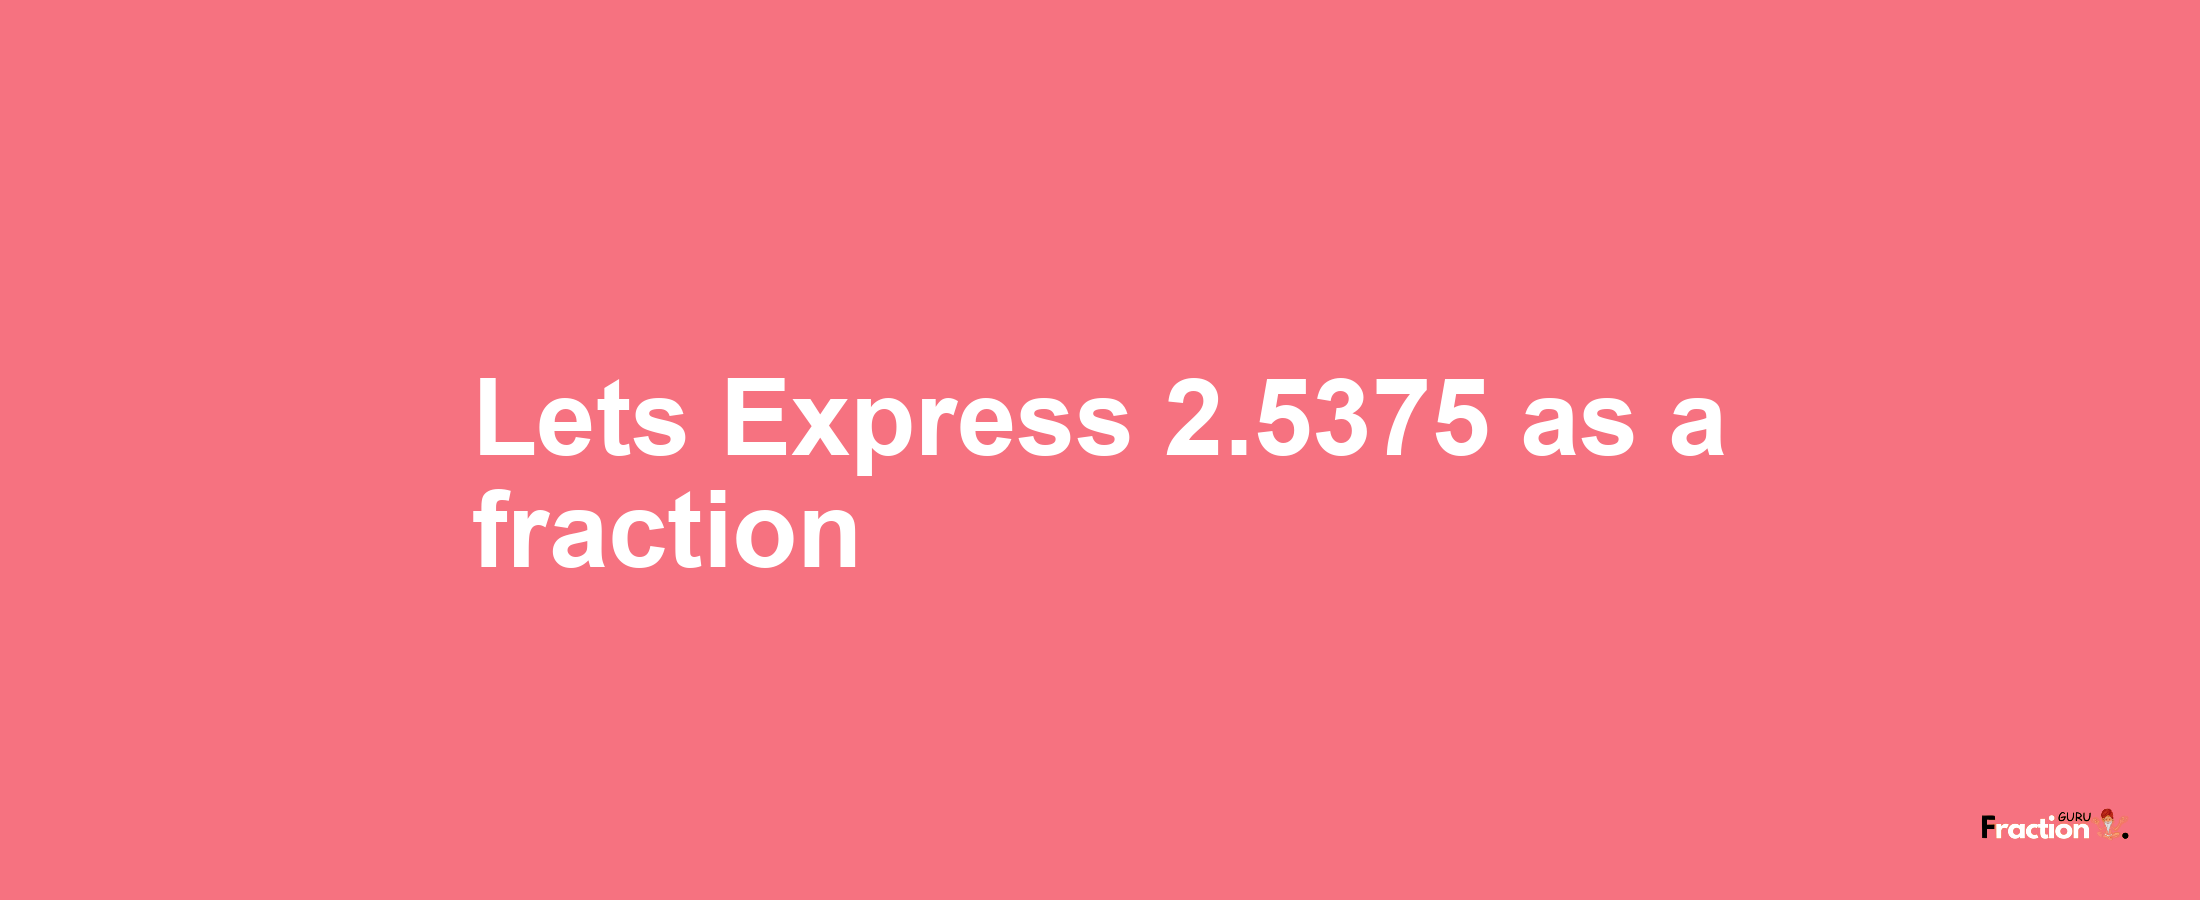 Lets Express 2.5375 as afraction